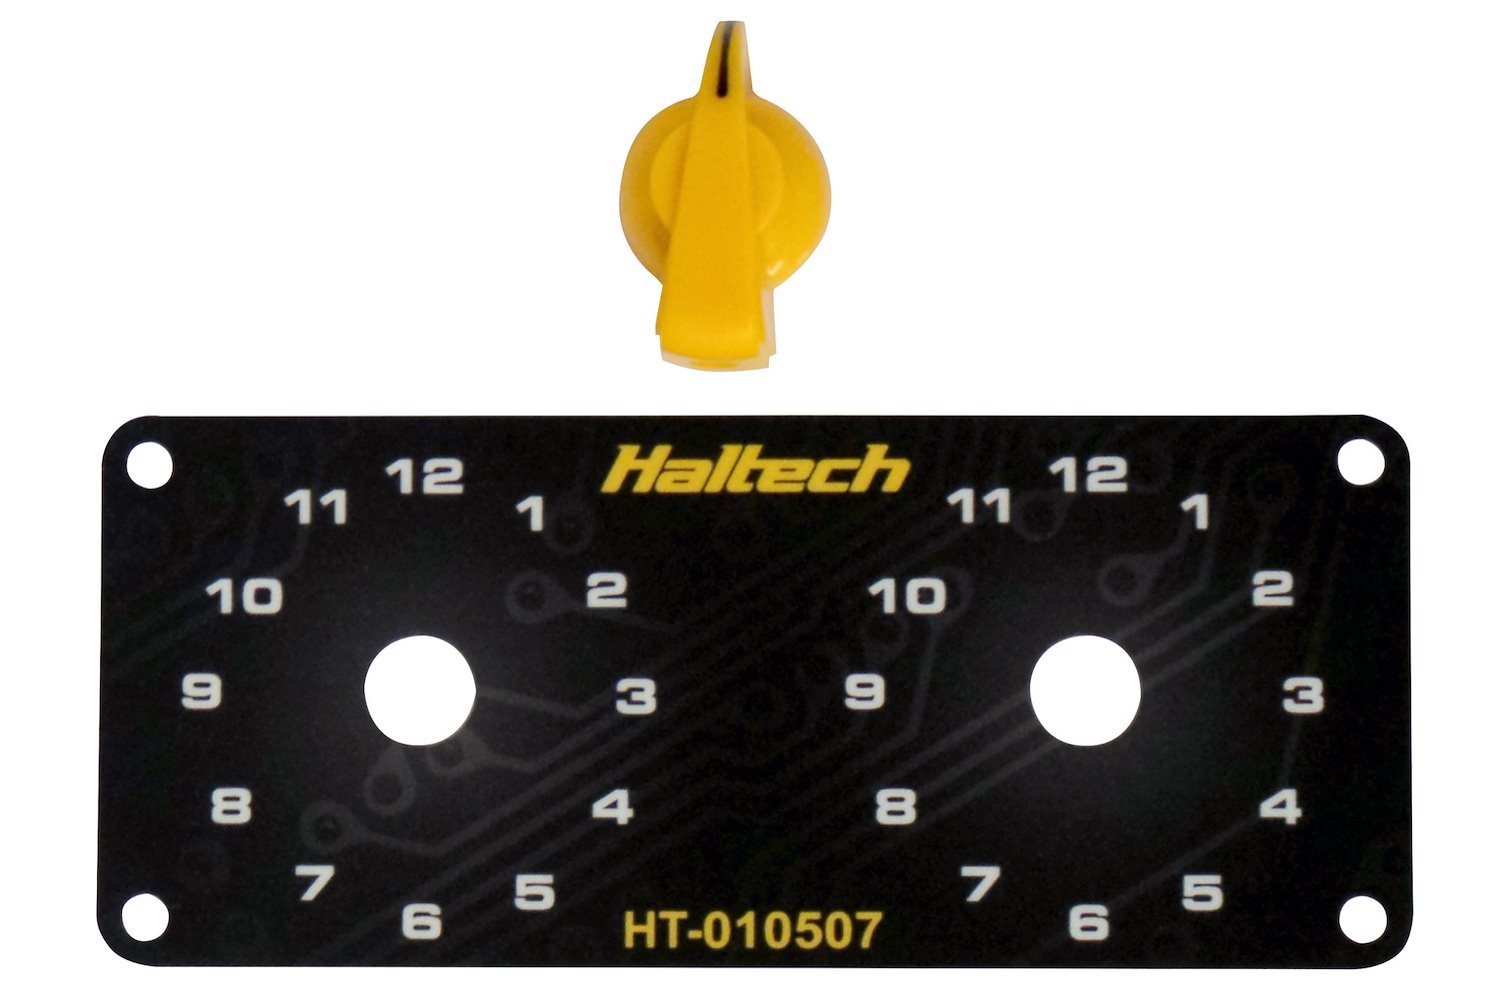 HT-010509 Dual Switch Panel Kit, Includes Yellow Knob